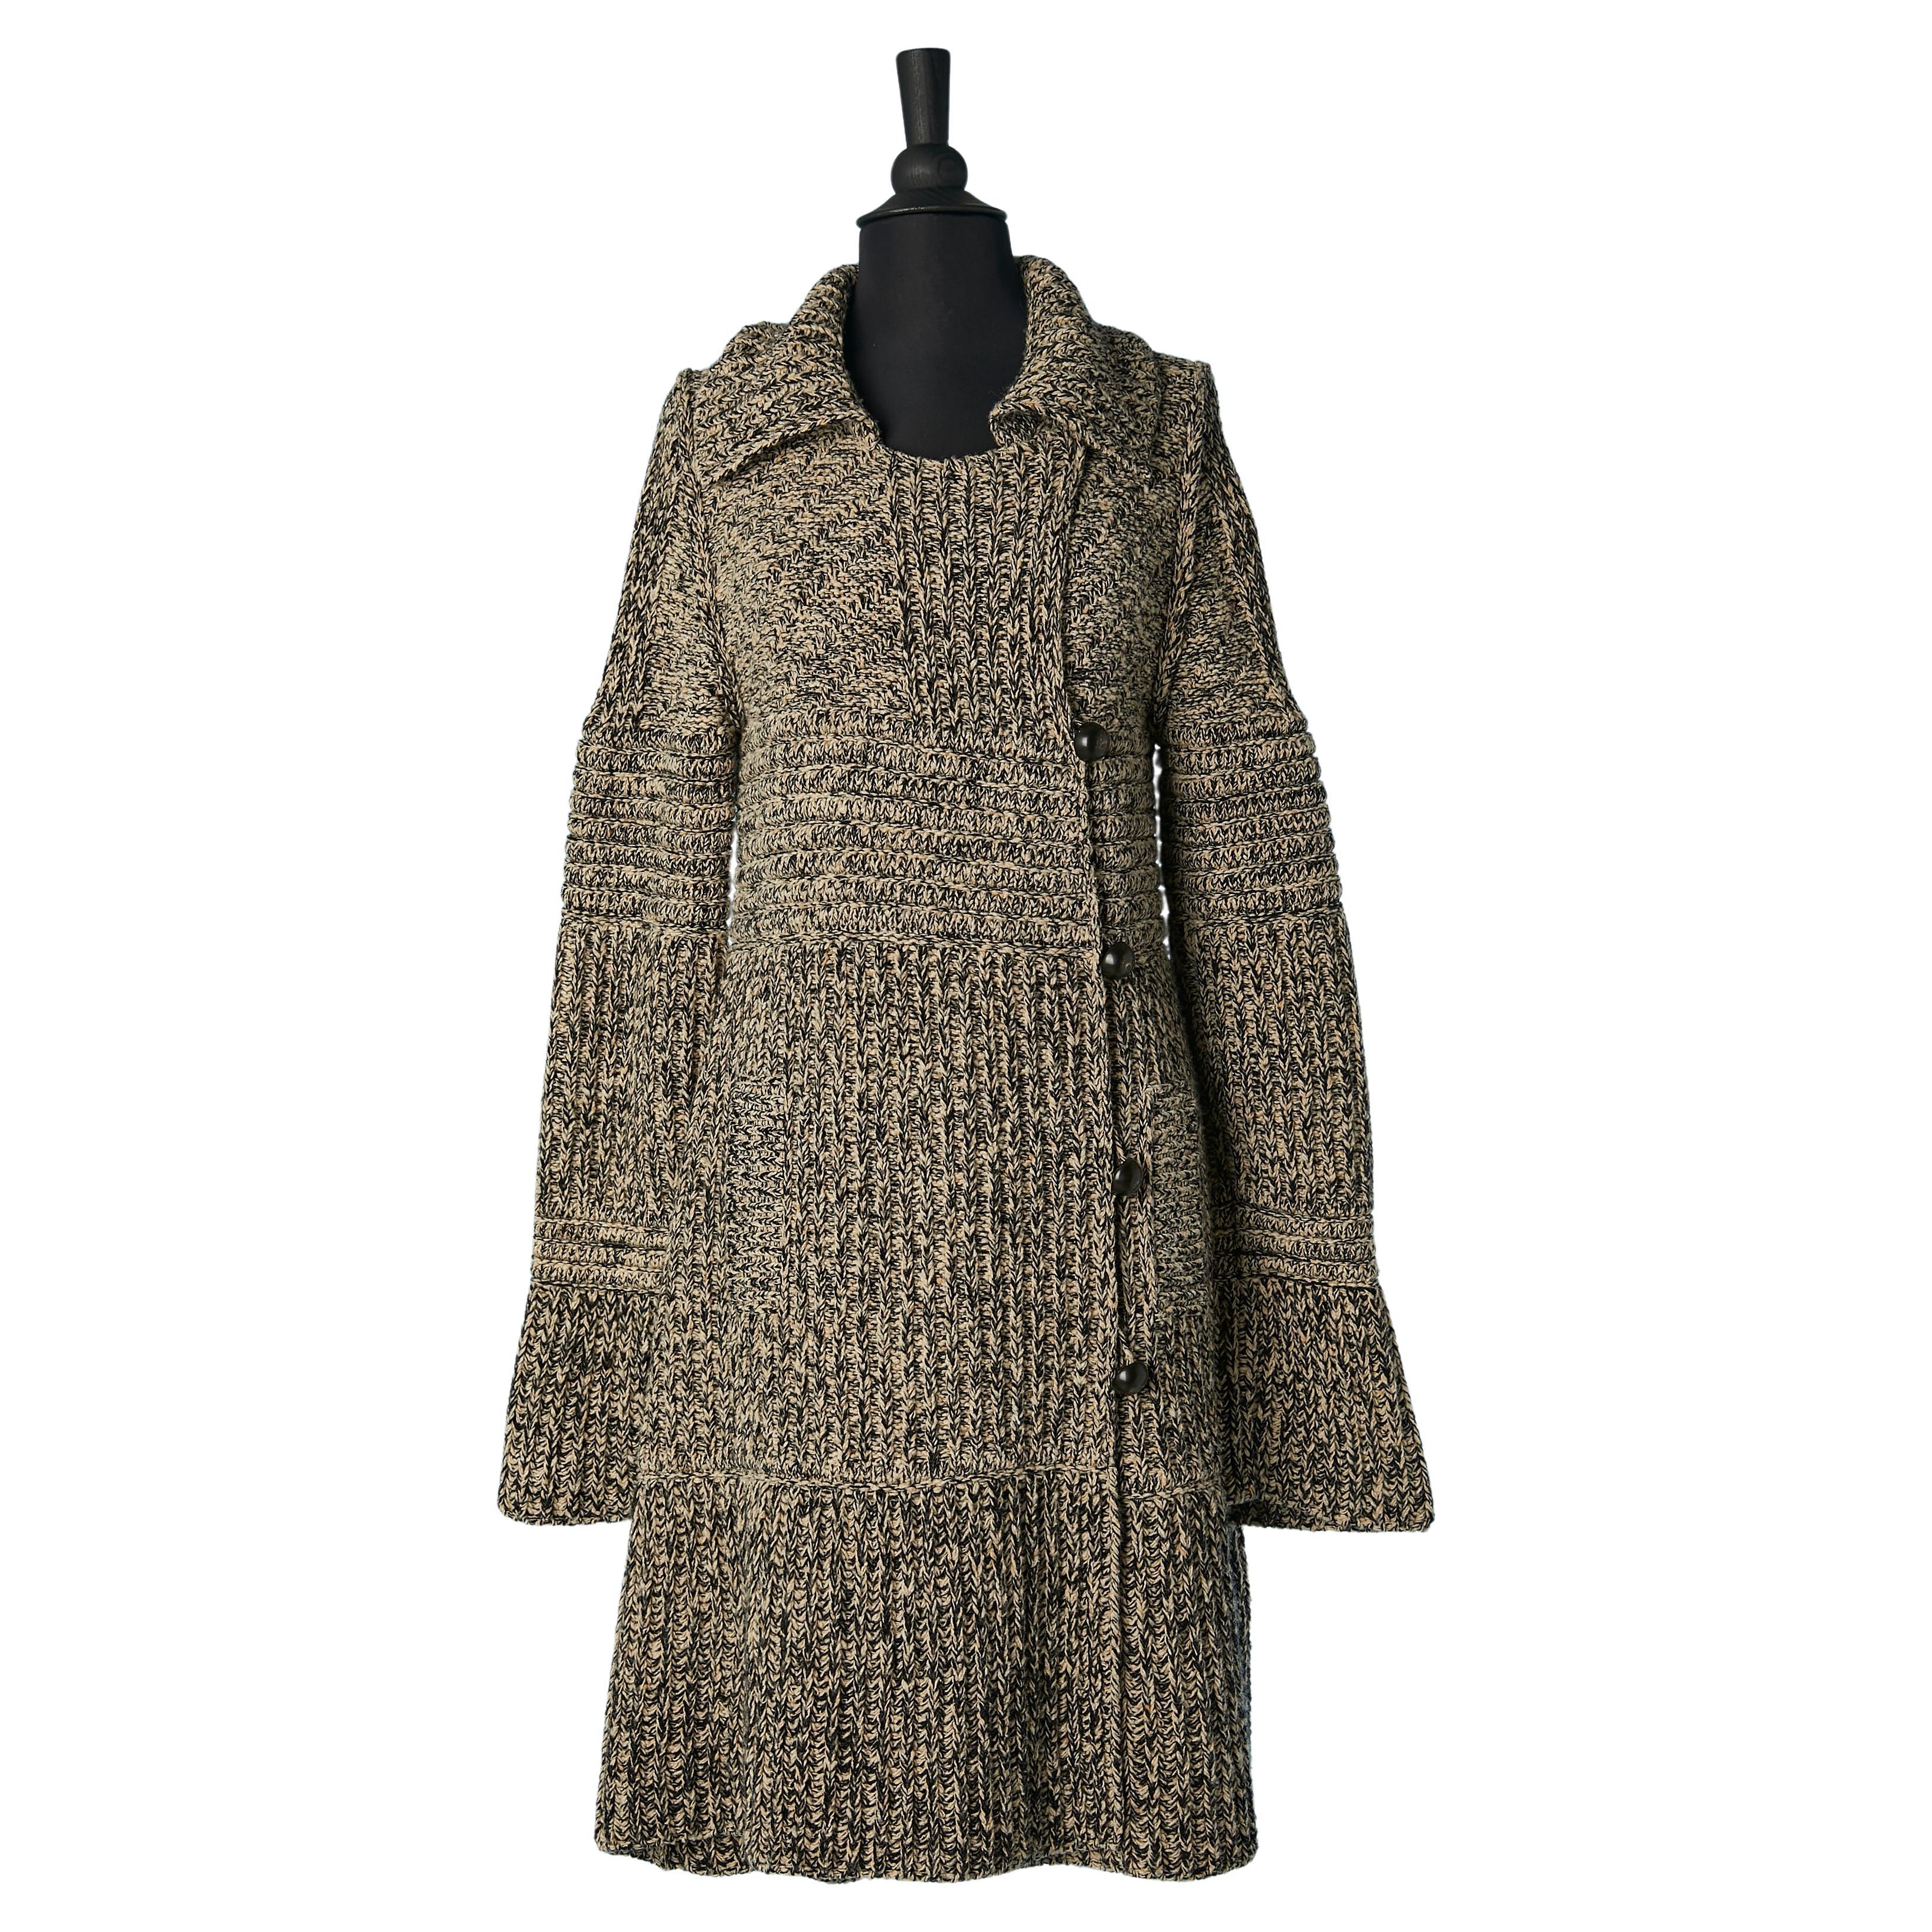 Black&off-white chiné knit coat Sonia Rykiel  For Sale